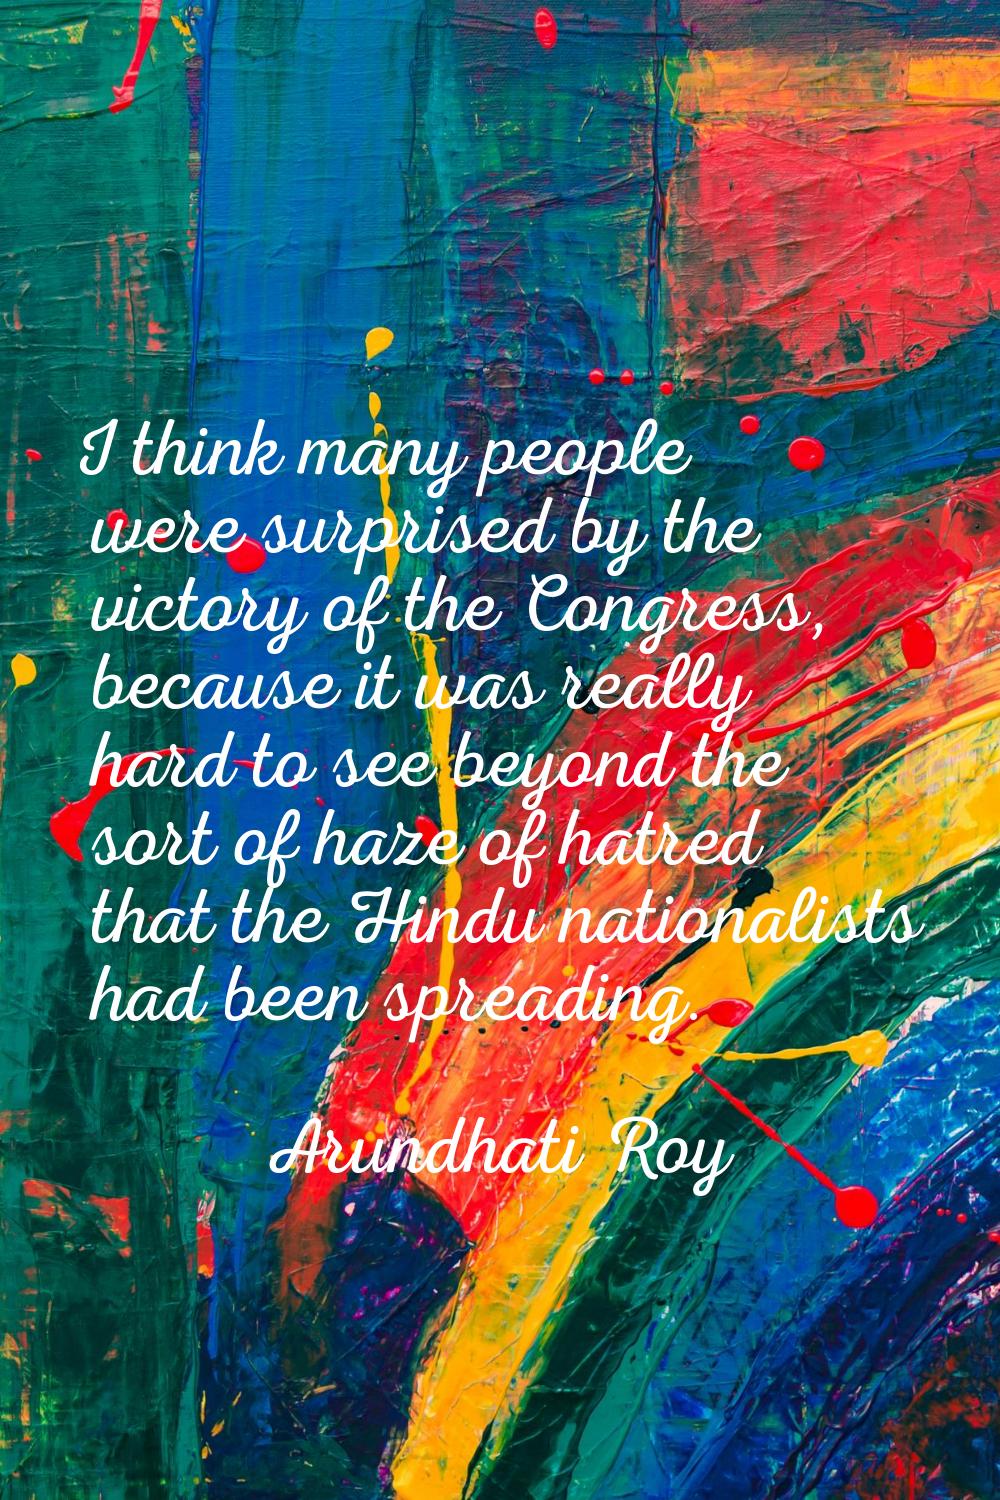 I think many people were surprised by the victory of the Congress, because it was really hard to se